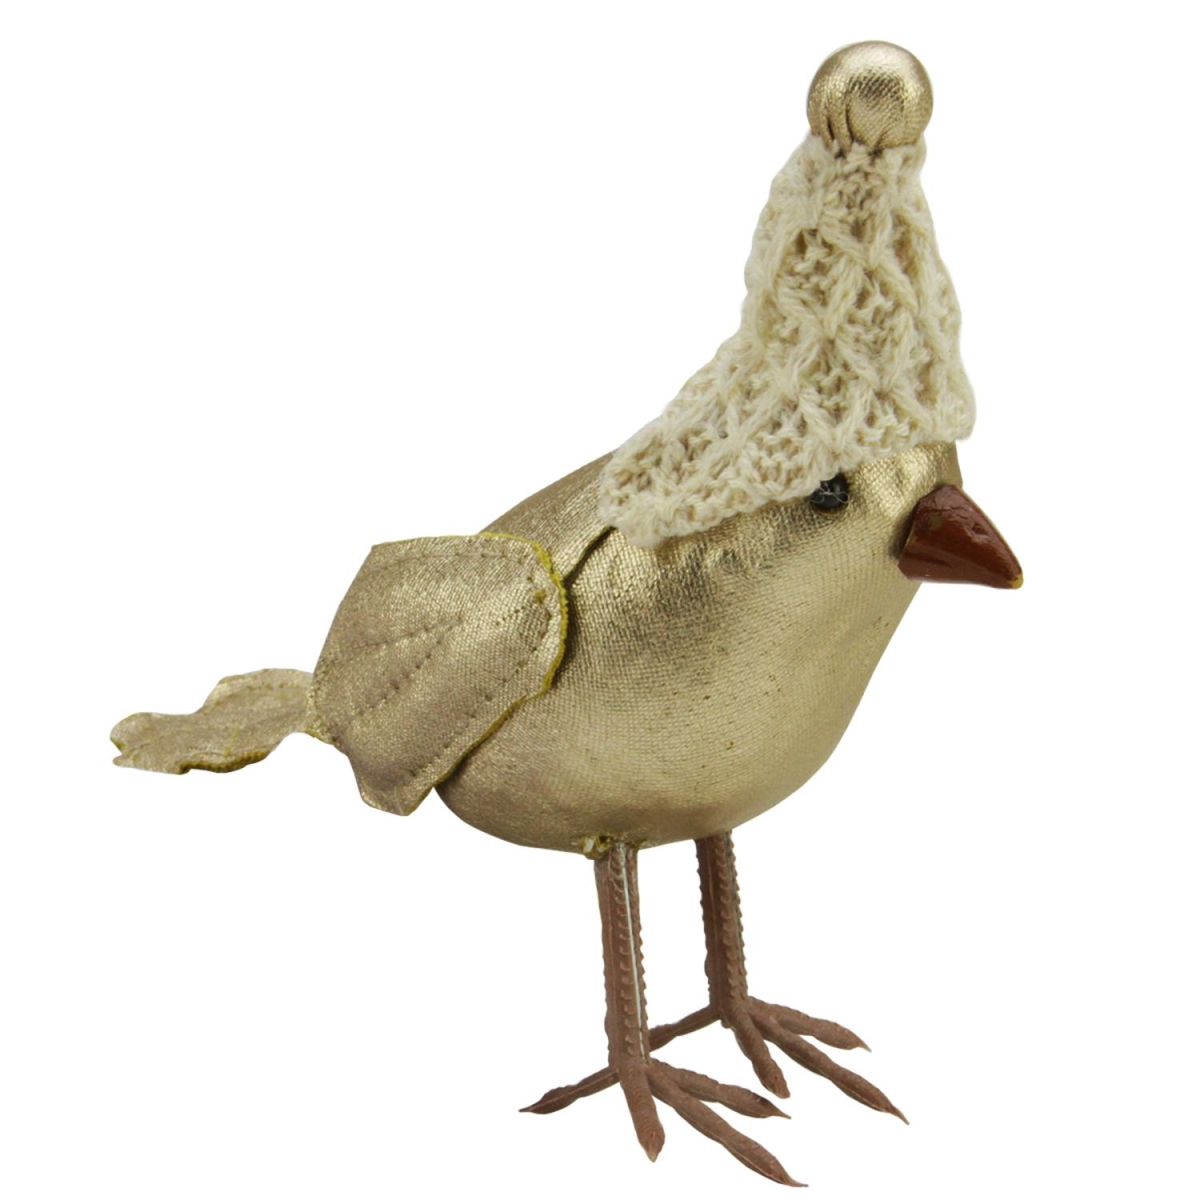 31452874 5 In. Gold Bird Wearing Knitted Peruvian Winter Hat Christmas Ornament